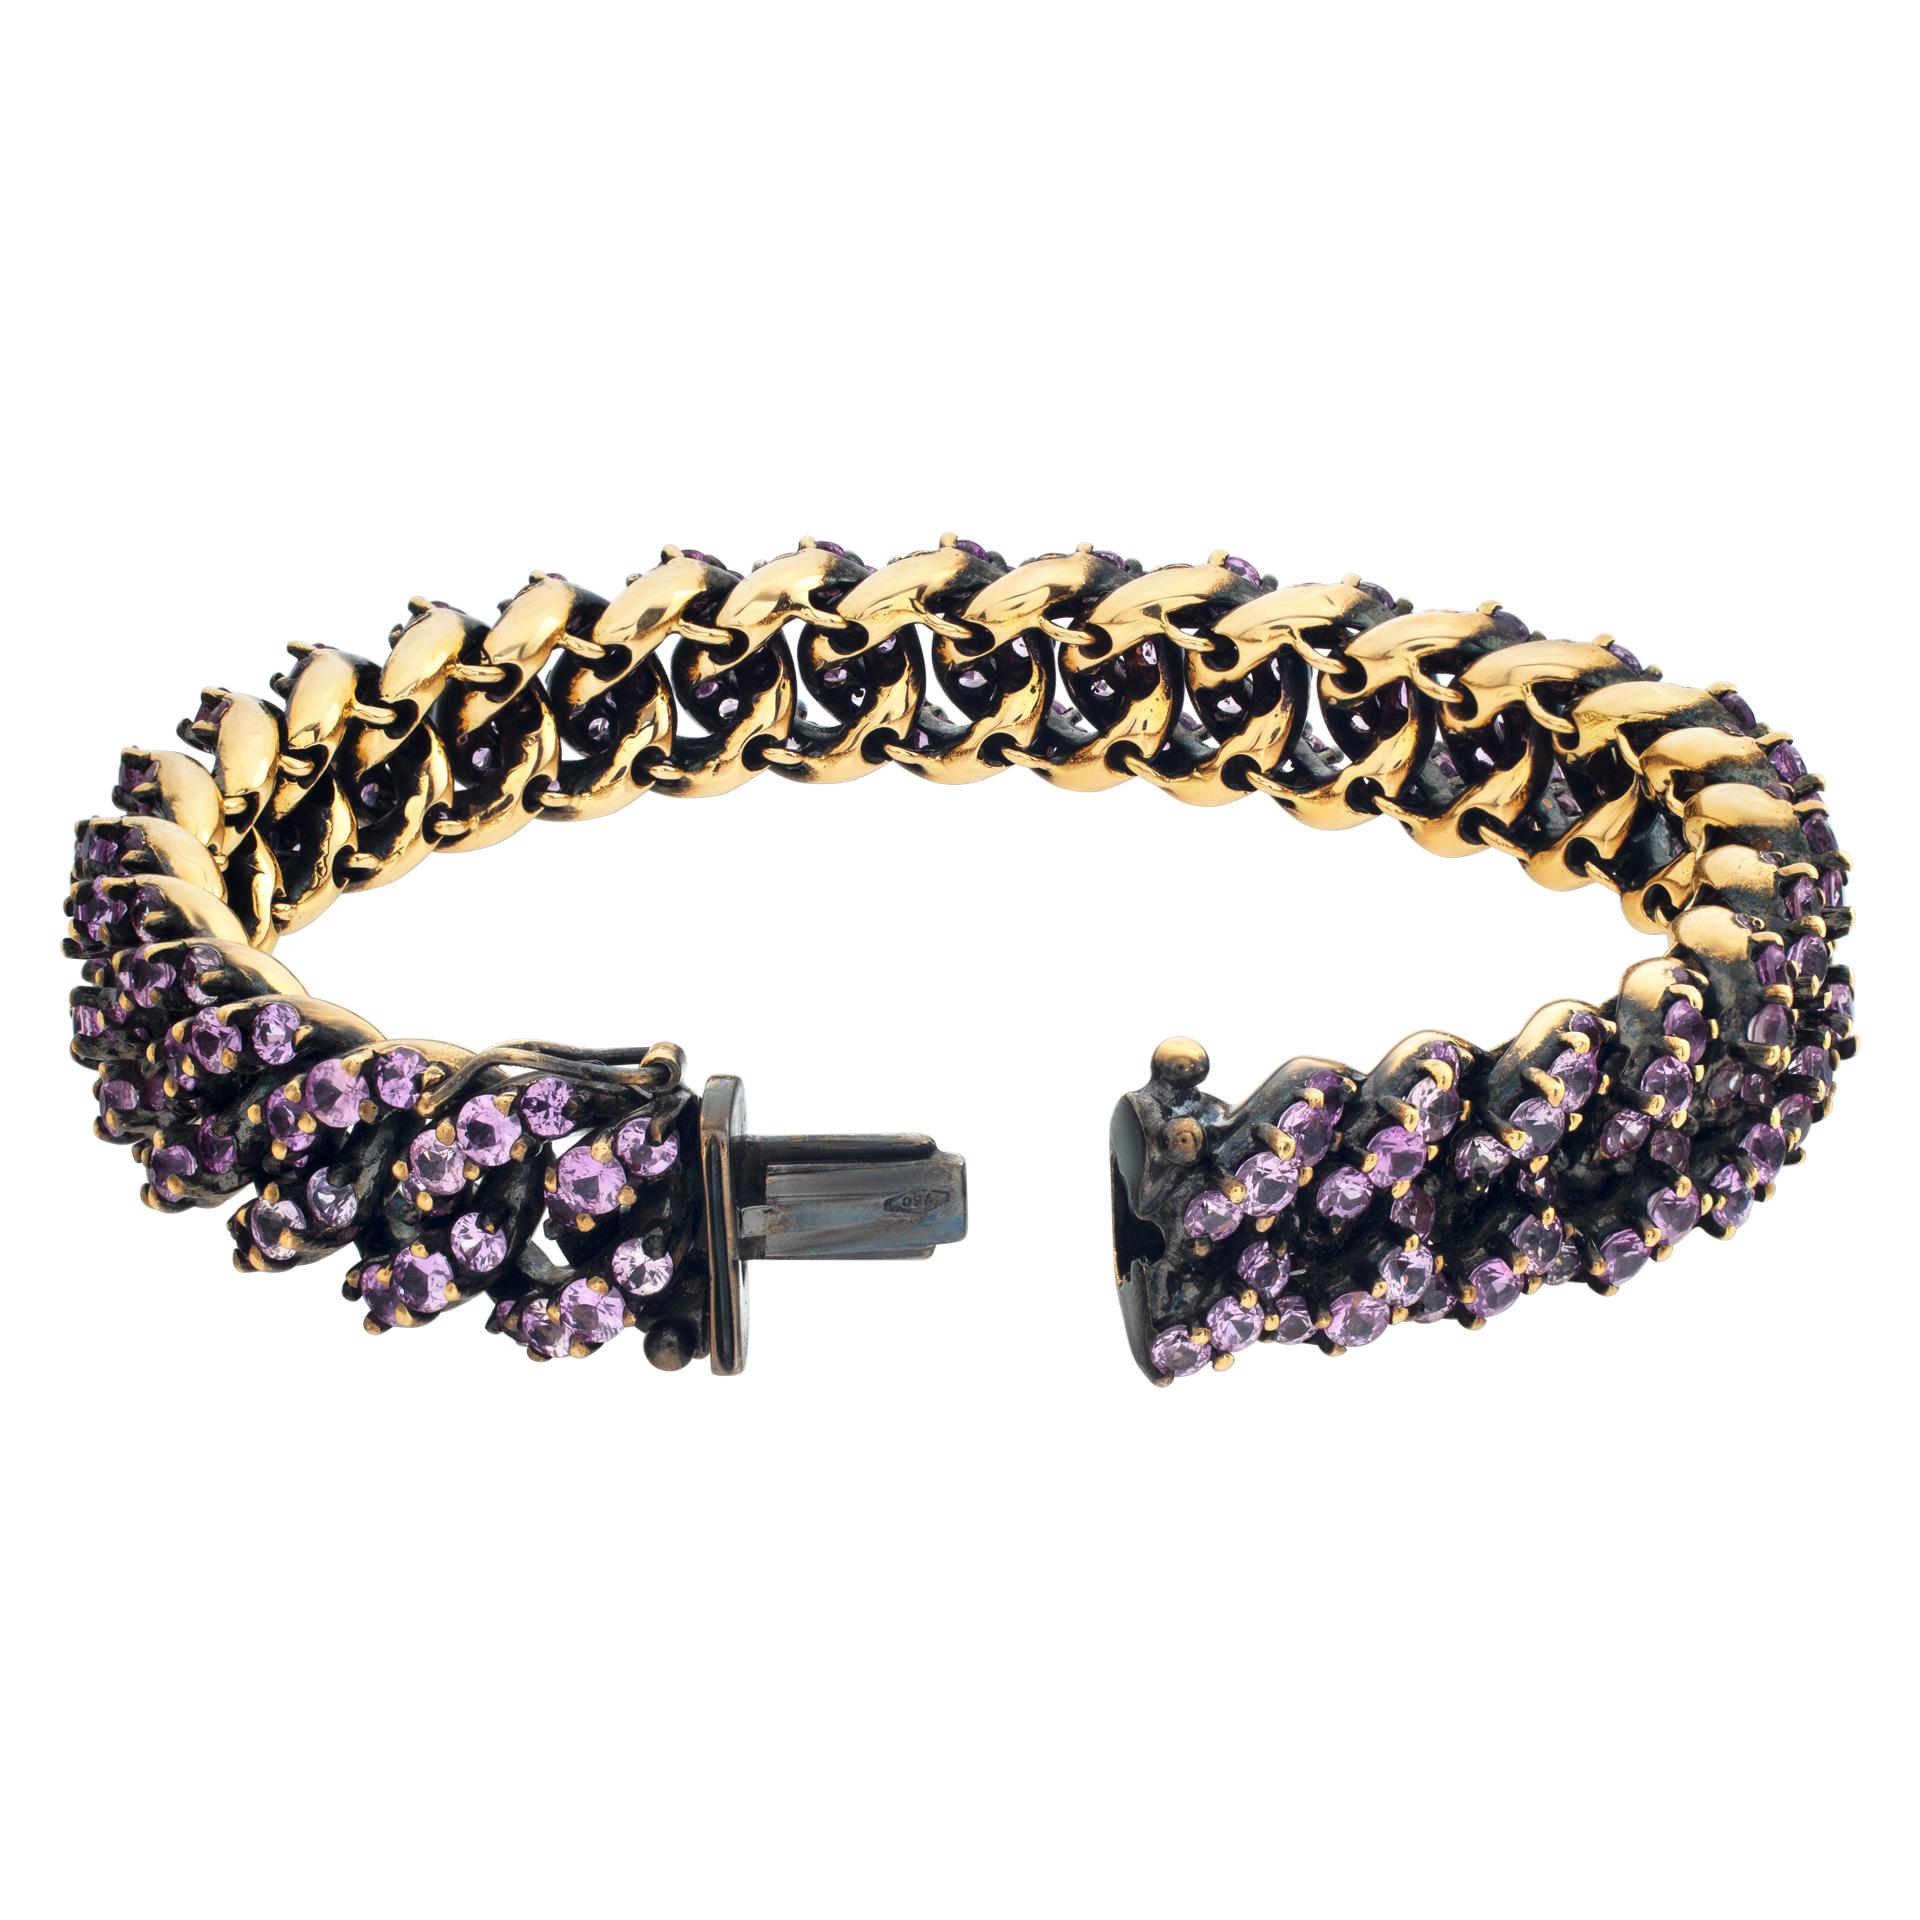 Women's or Men's 18k Gold Bracelet Wiith over 2 Carats Round Brilliant Cut Pink Sapphire